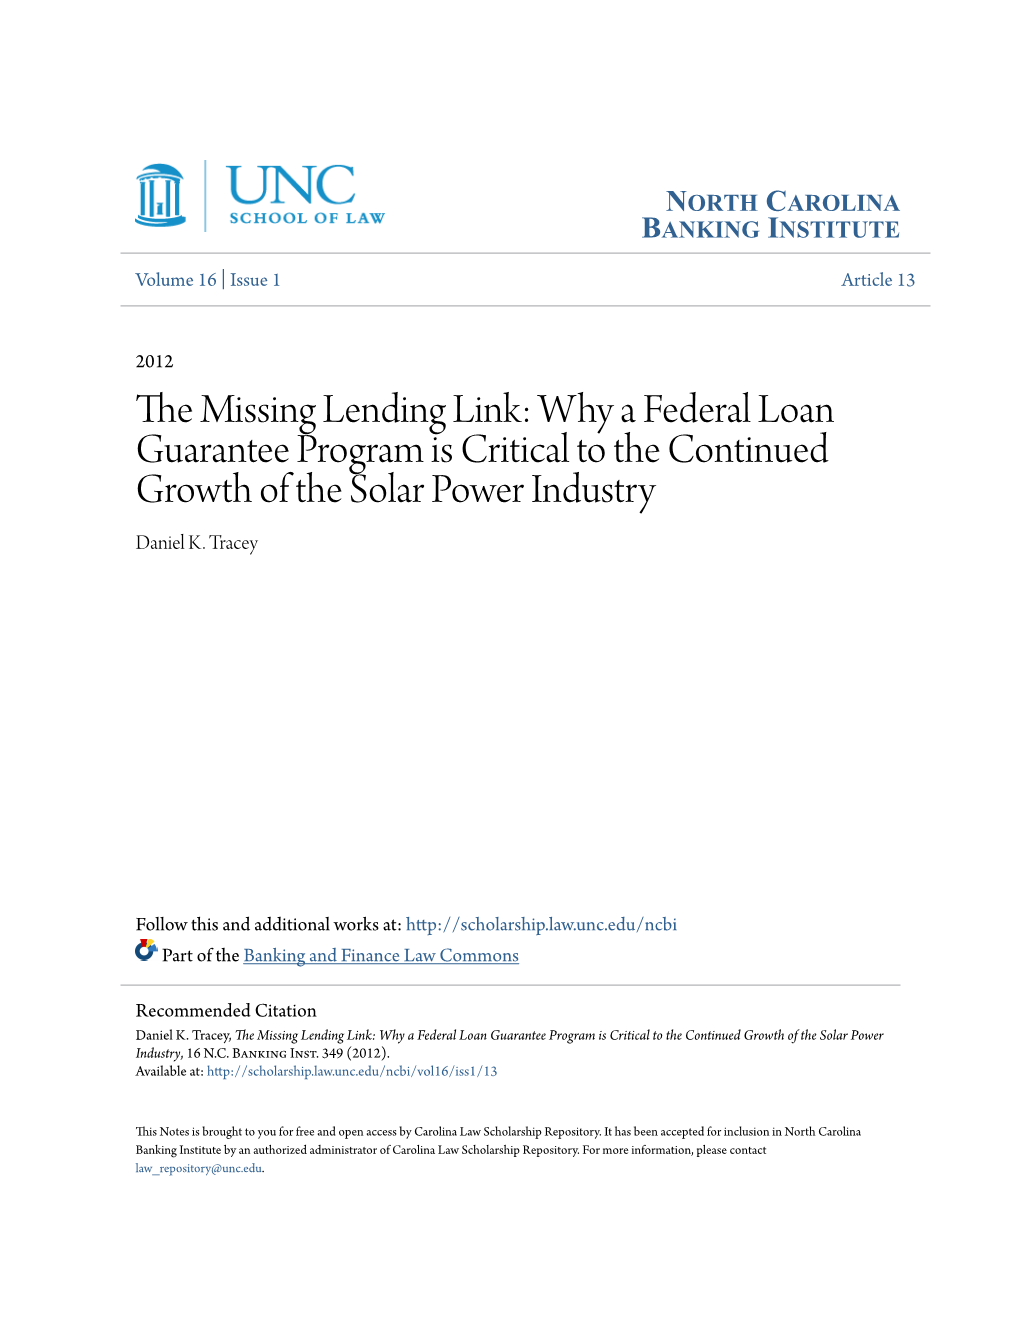 The Missing Lending Link: Why a Federal Loan Guarantee Program Is Critical to the Continued Growth of the Solar Power Industry, 16 N.C